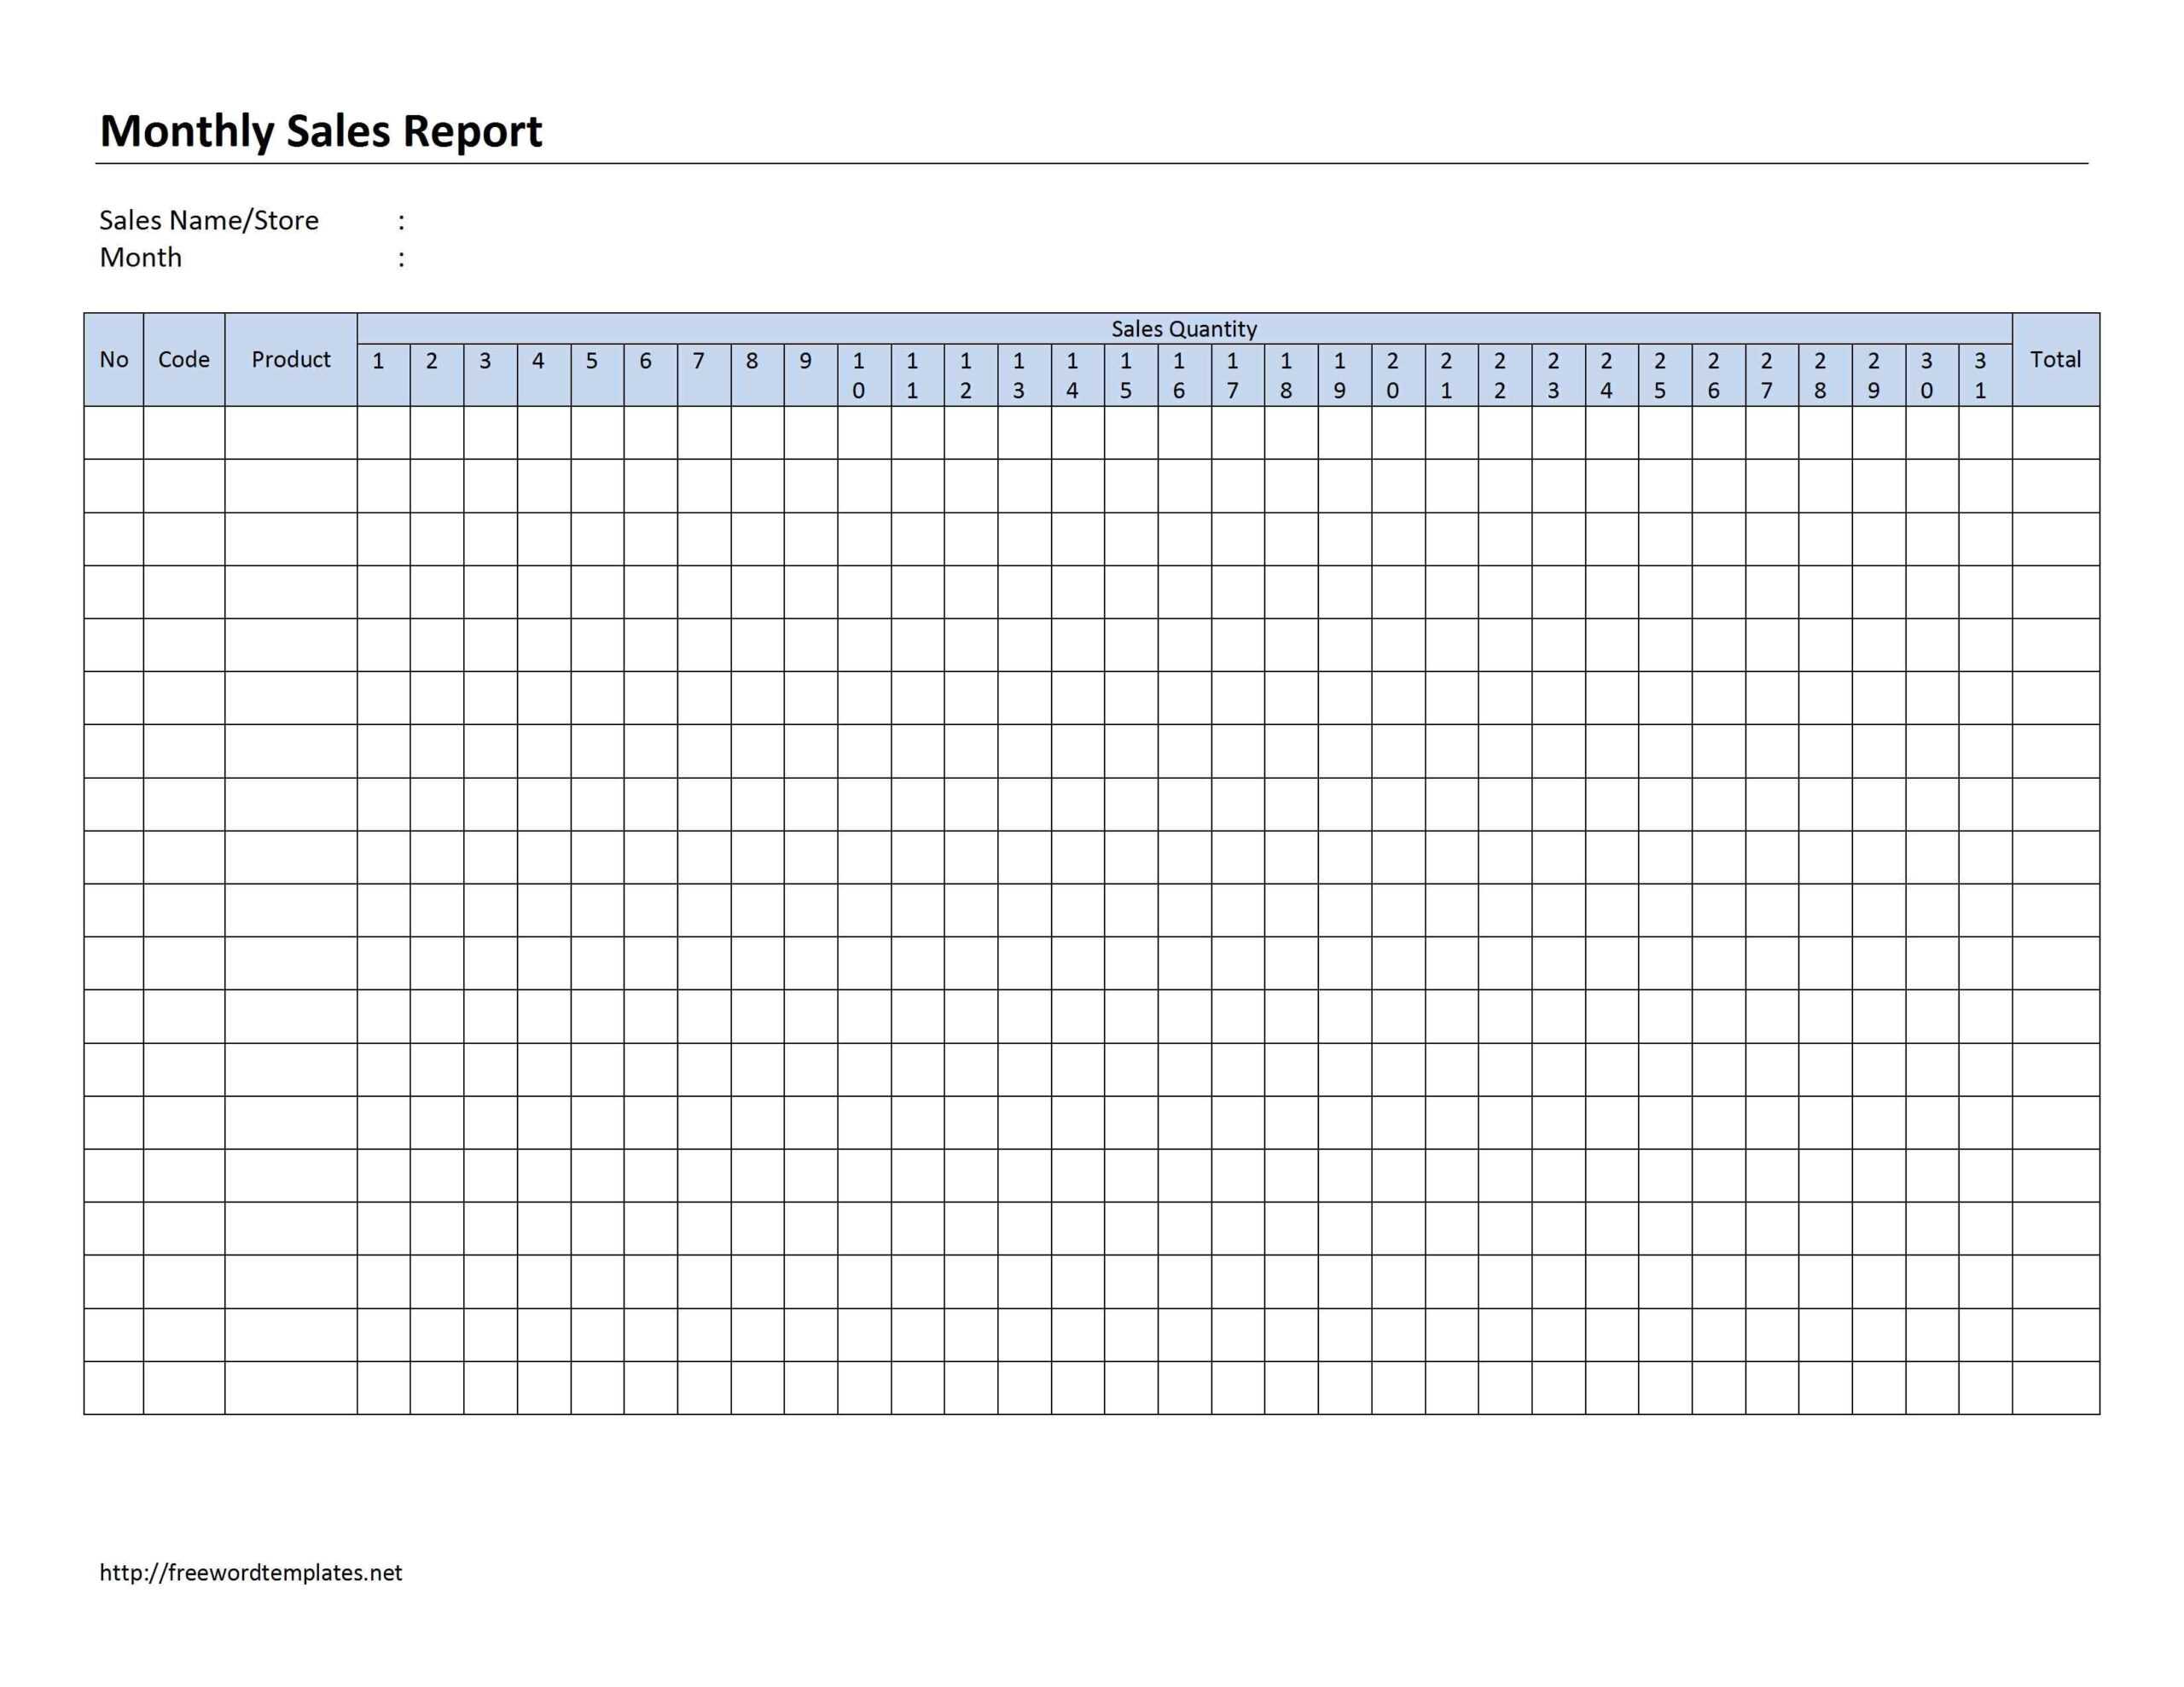 Replacethis] Monthly Sales Report Template And Form : V M D Intended For Sales Manager Monthly Report Templates